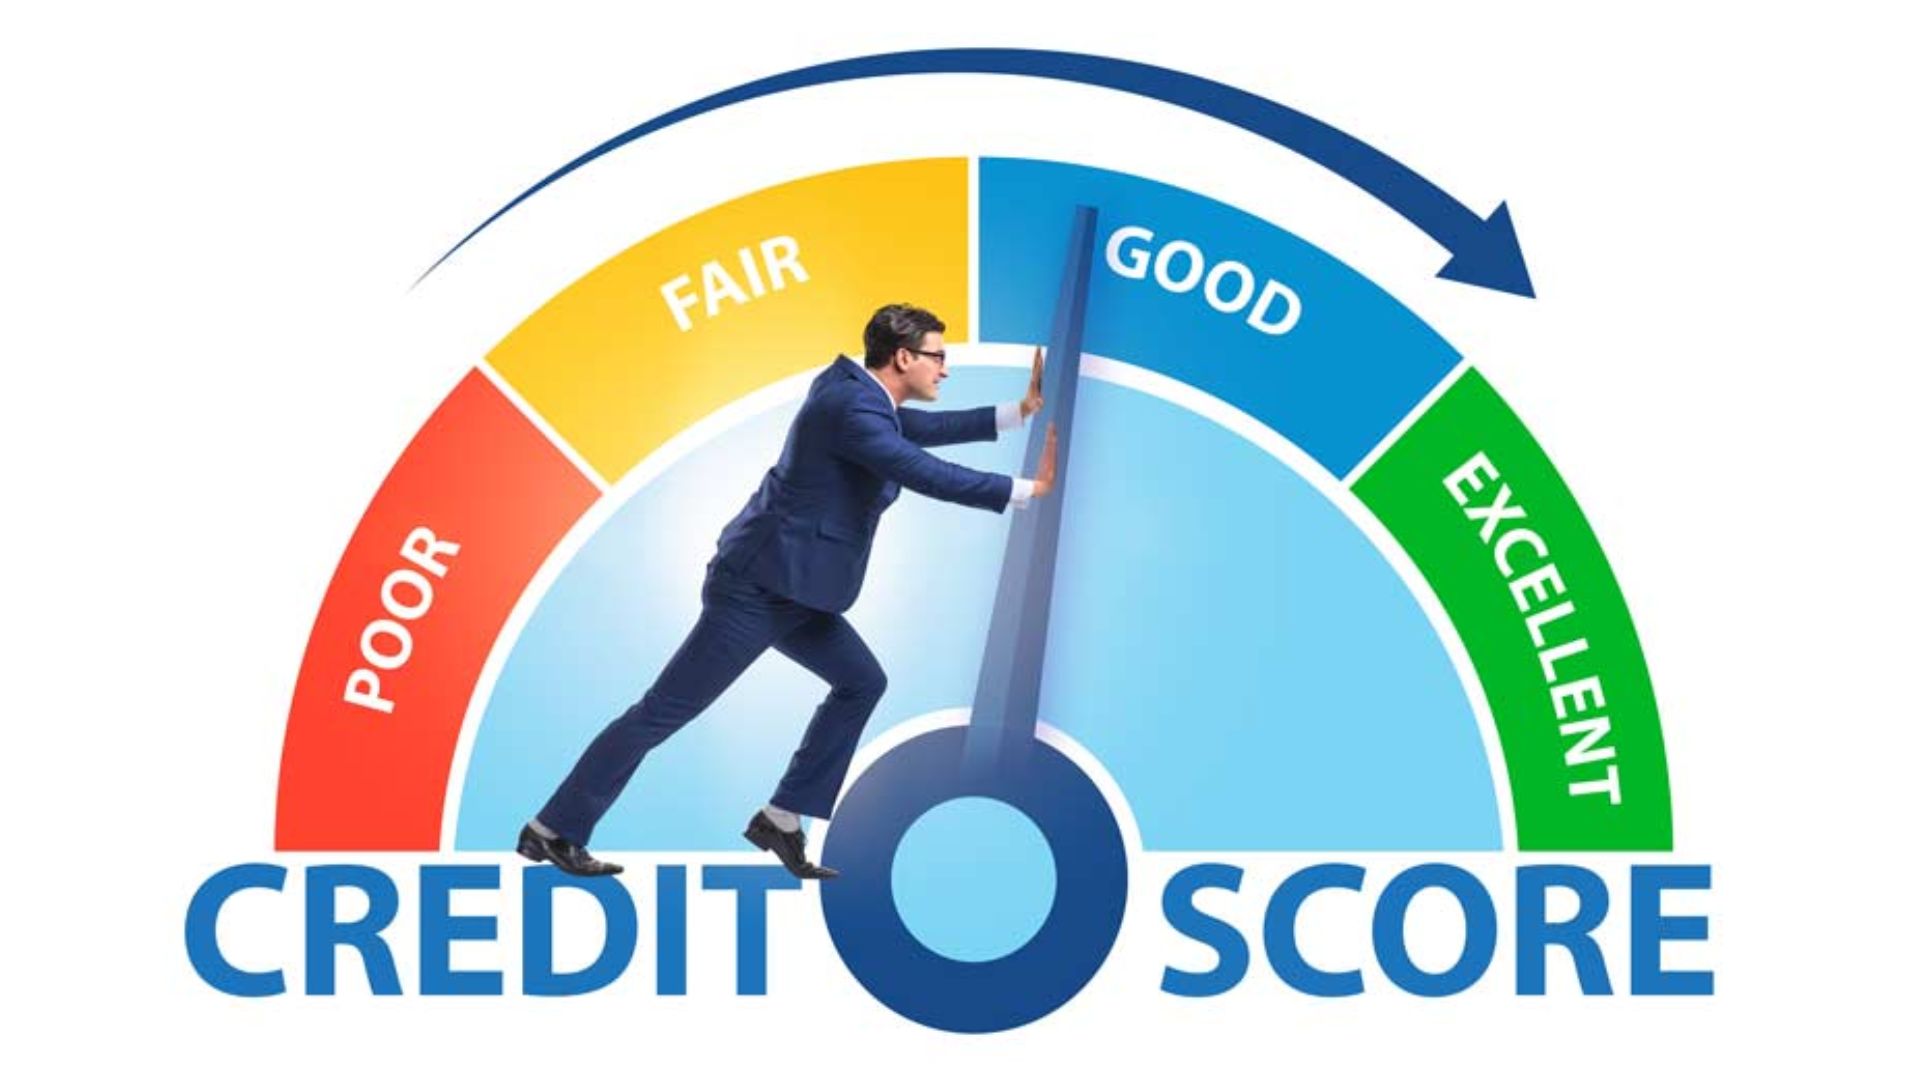 Work on Improving Your Credit.